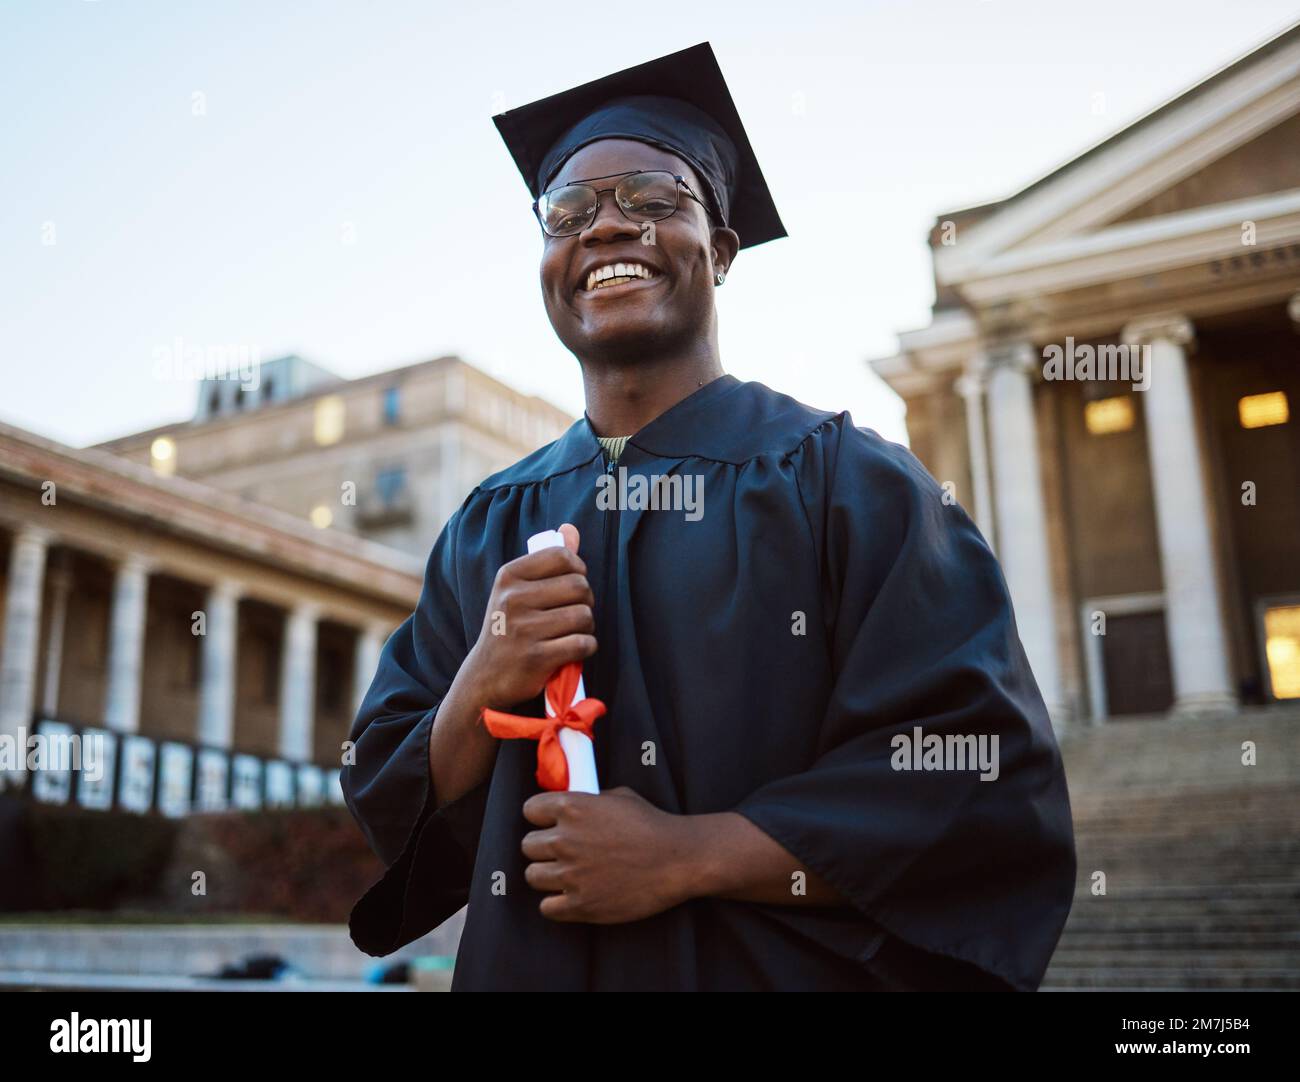 University diploma, graduation and portrait of a black man at campus to celebrate success in school. Scholarship, pride and African student with Stock Photo